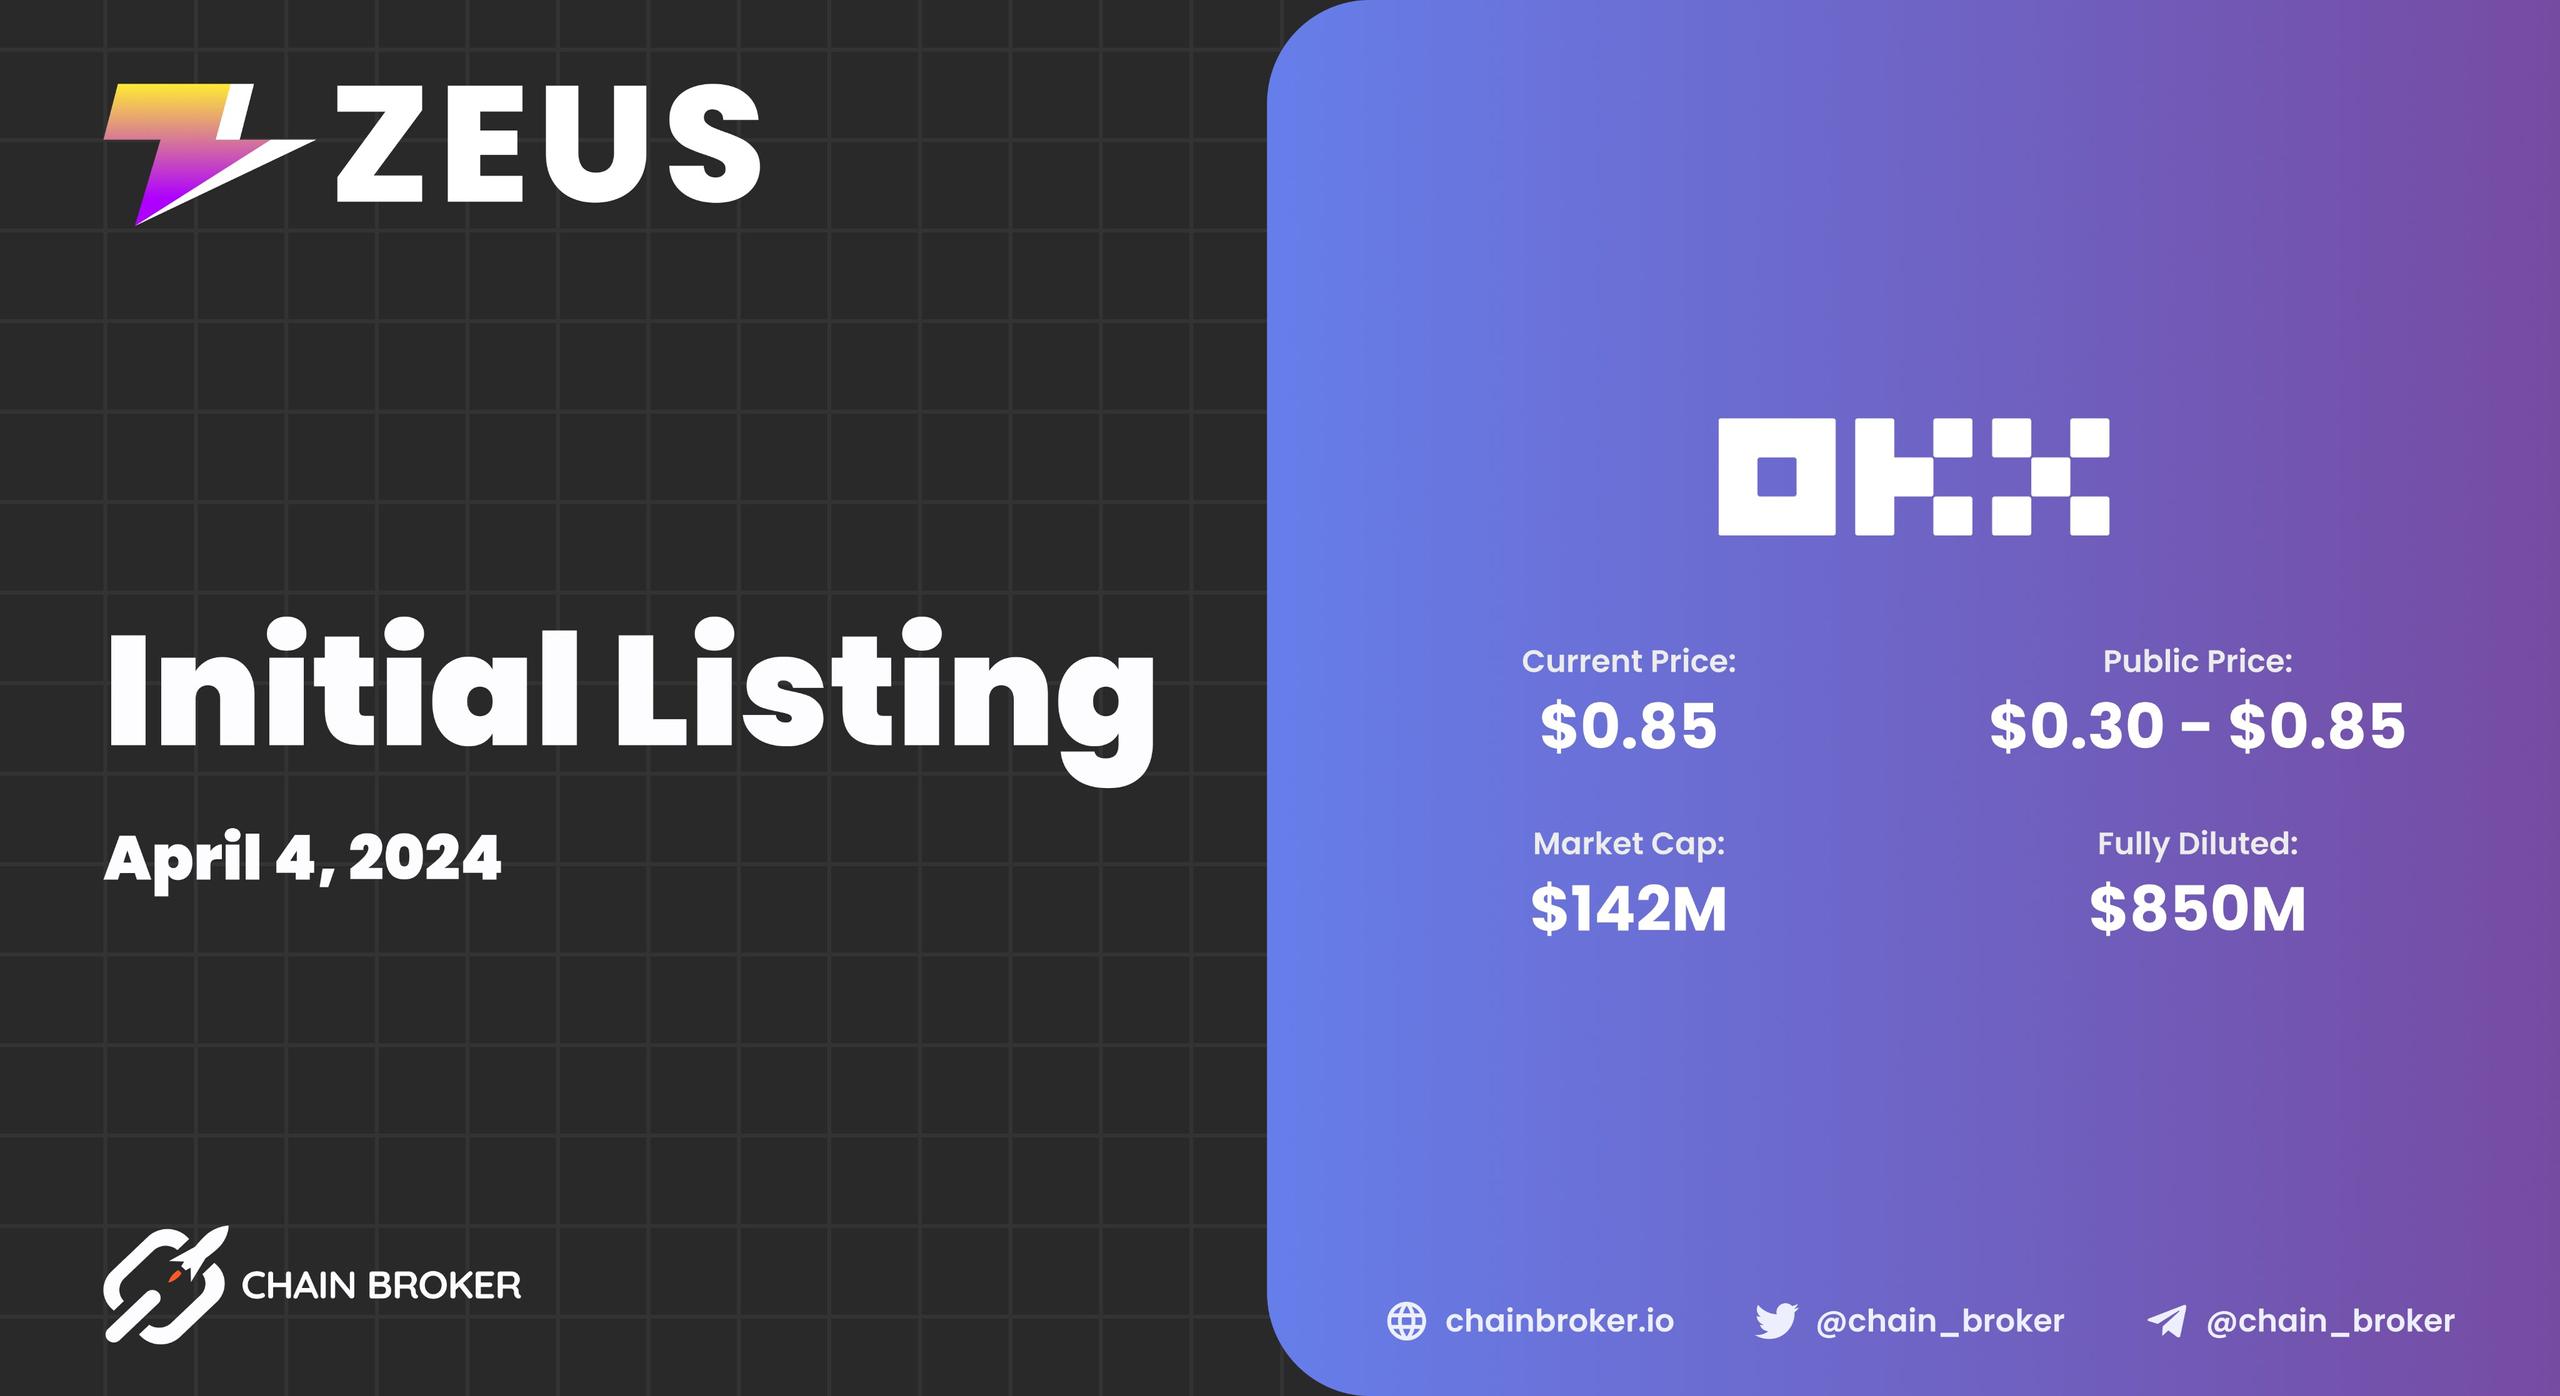 Zeus Network has been Listed on OKX